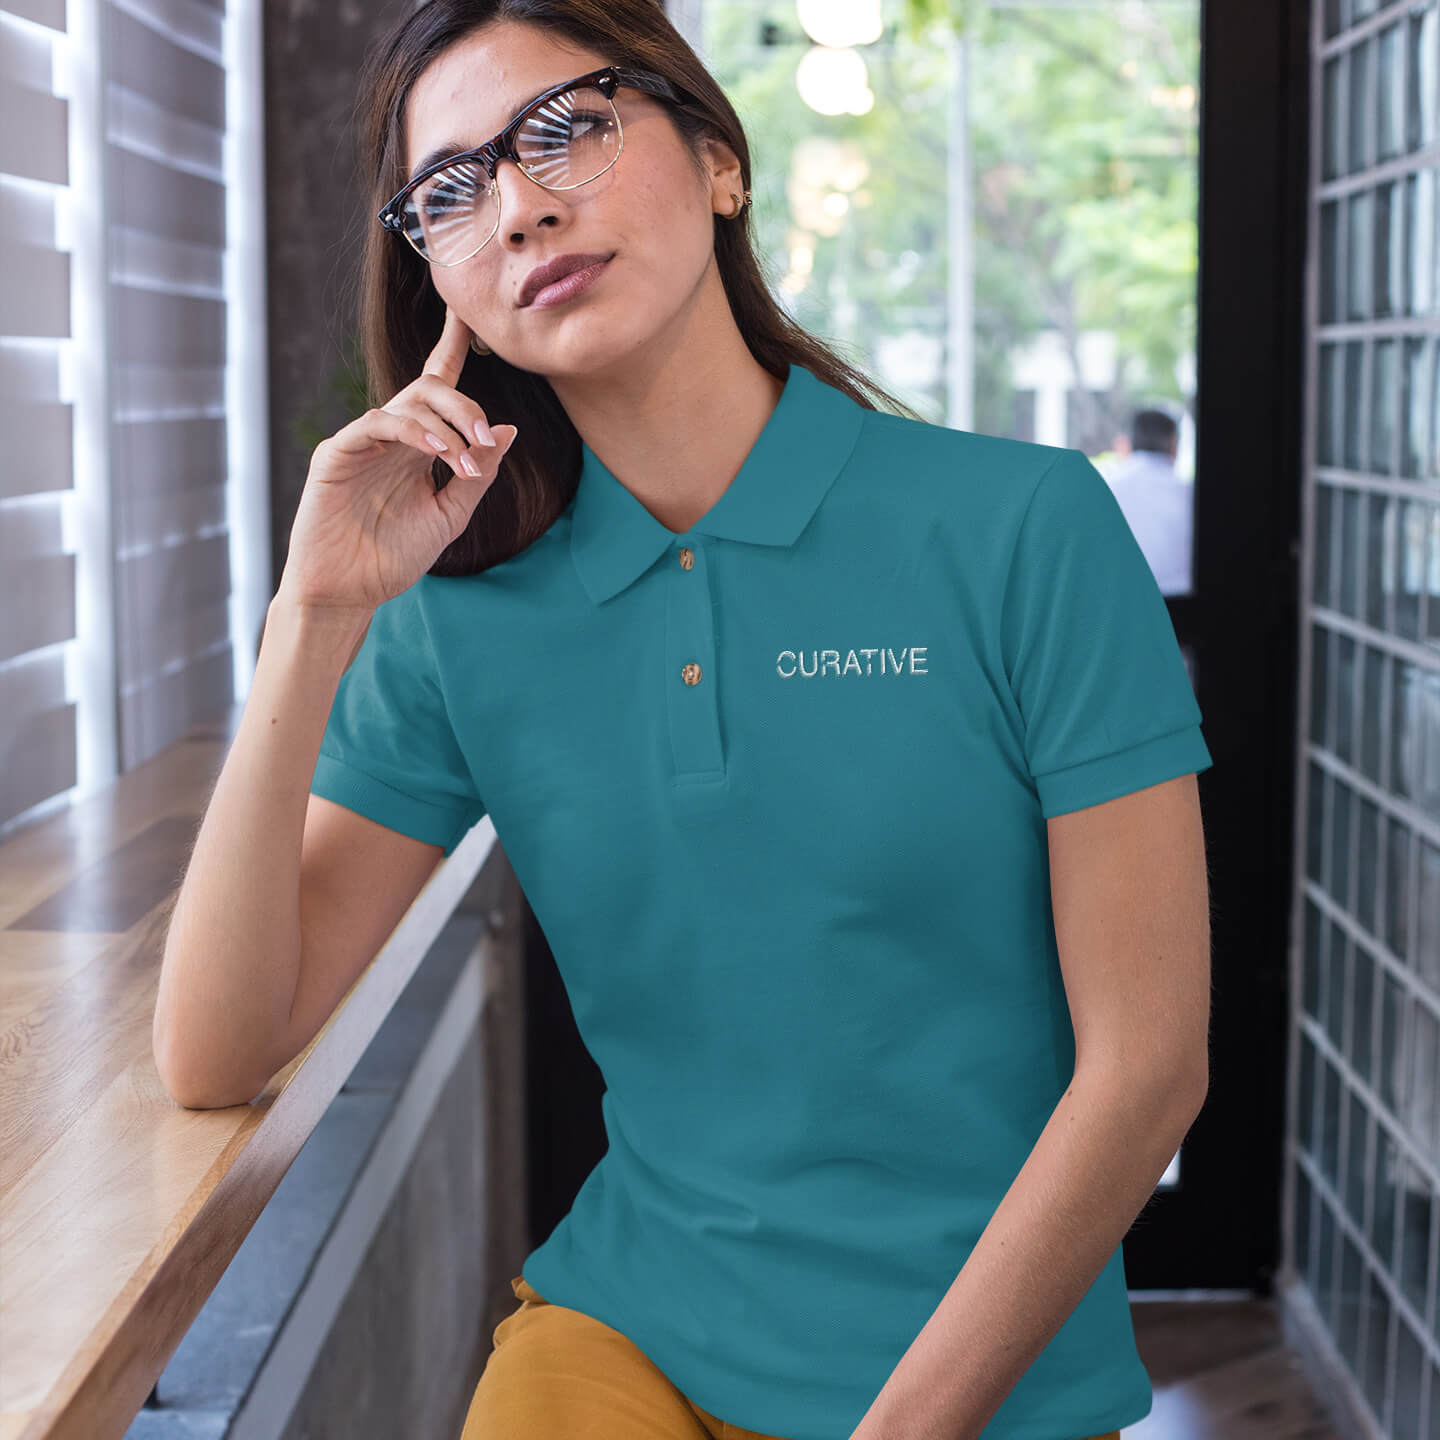 Woman sits in a cafe wearing a teal polo collar shirt with white curative printing logo imprint